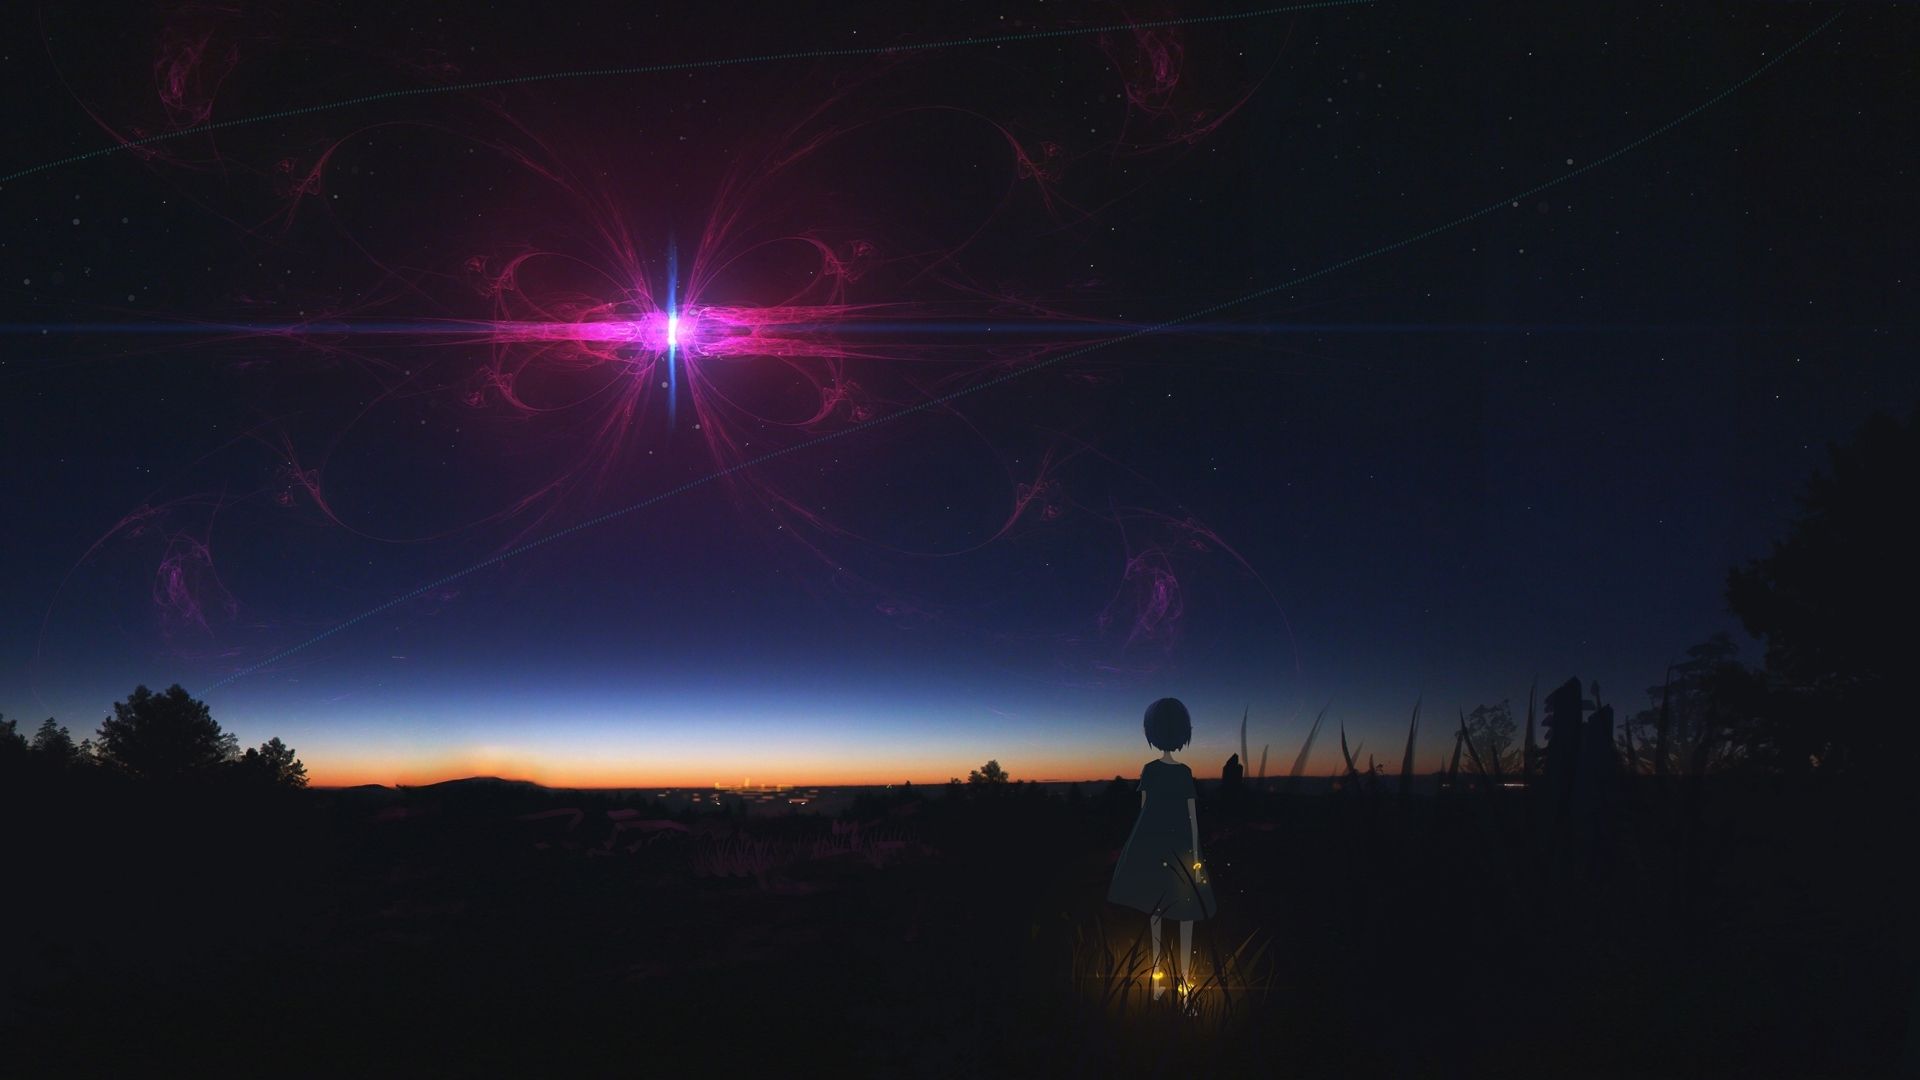 Anime Girl Staring At Night Sky 1080P Laptop Full HD Wallpaper, HD Anime 4K Wallpaper, Image, Photo and Background